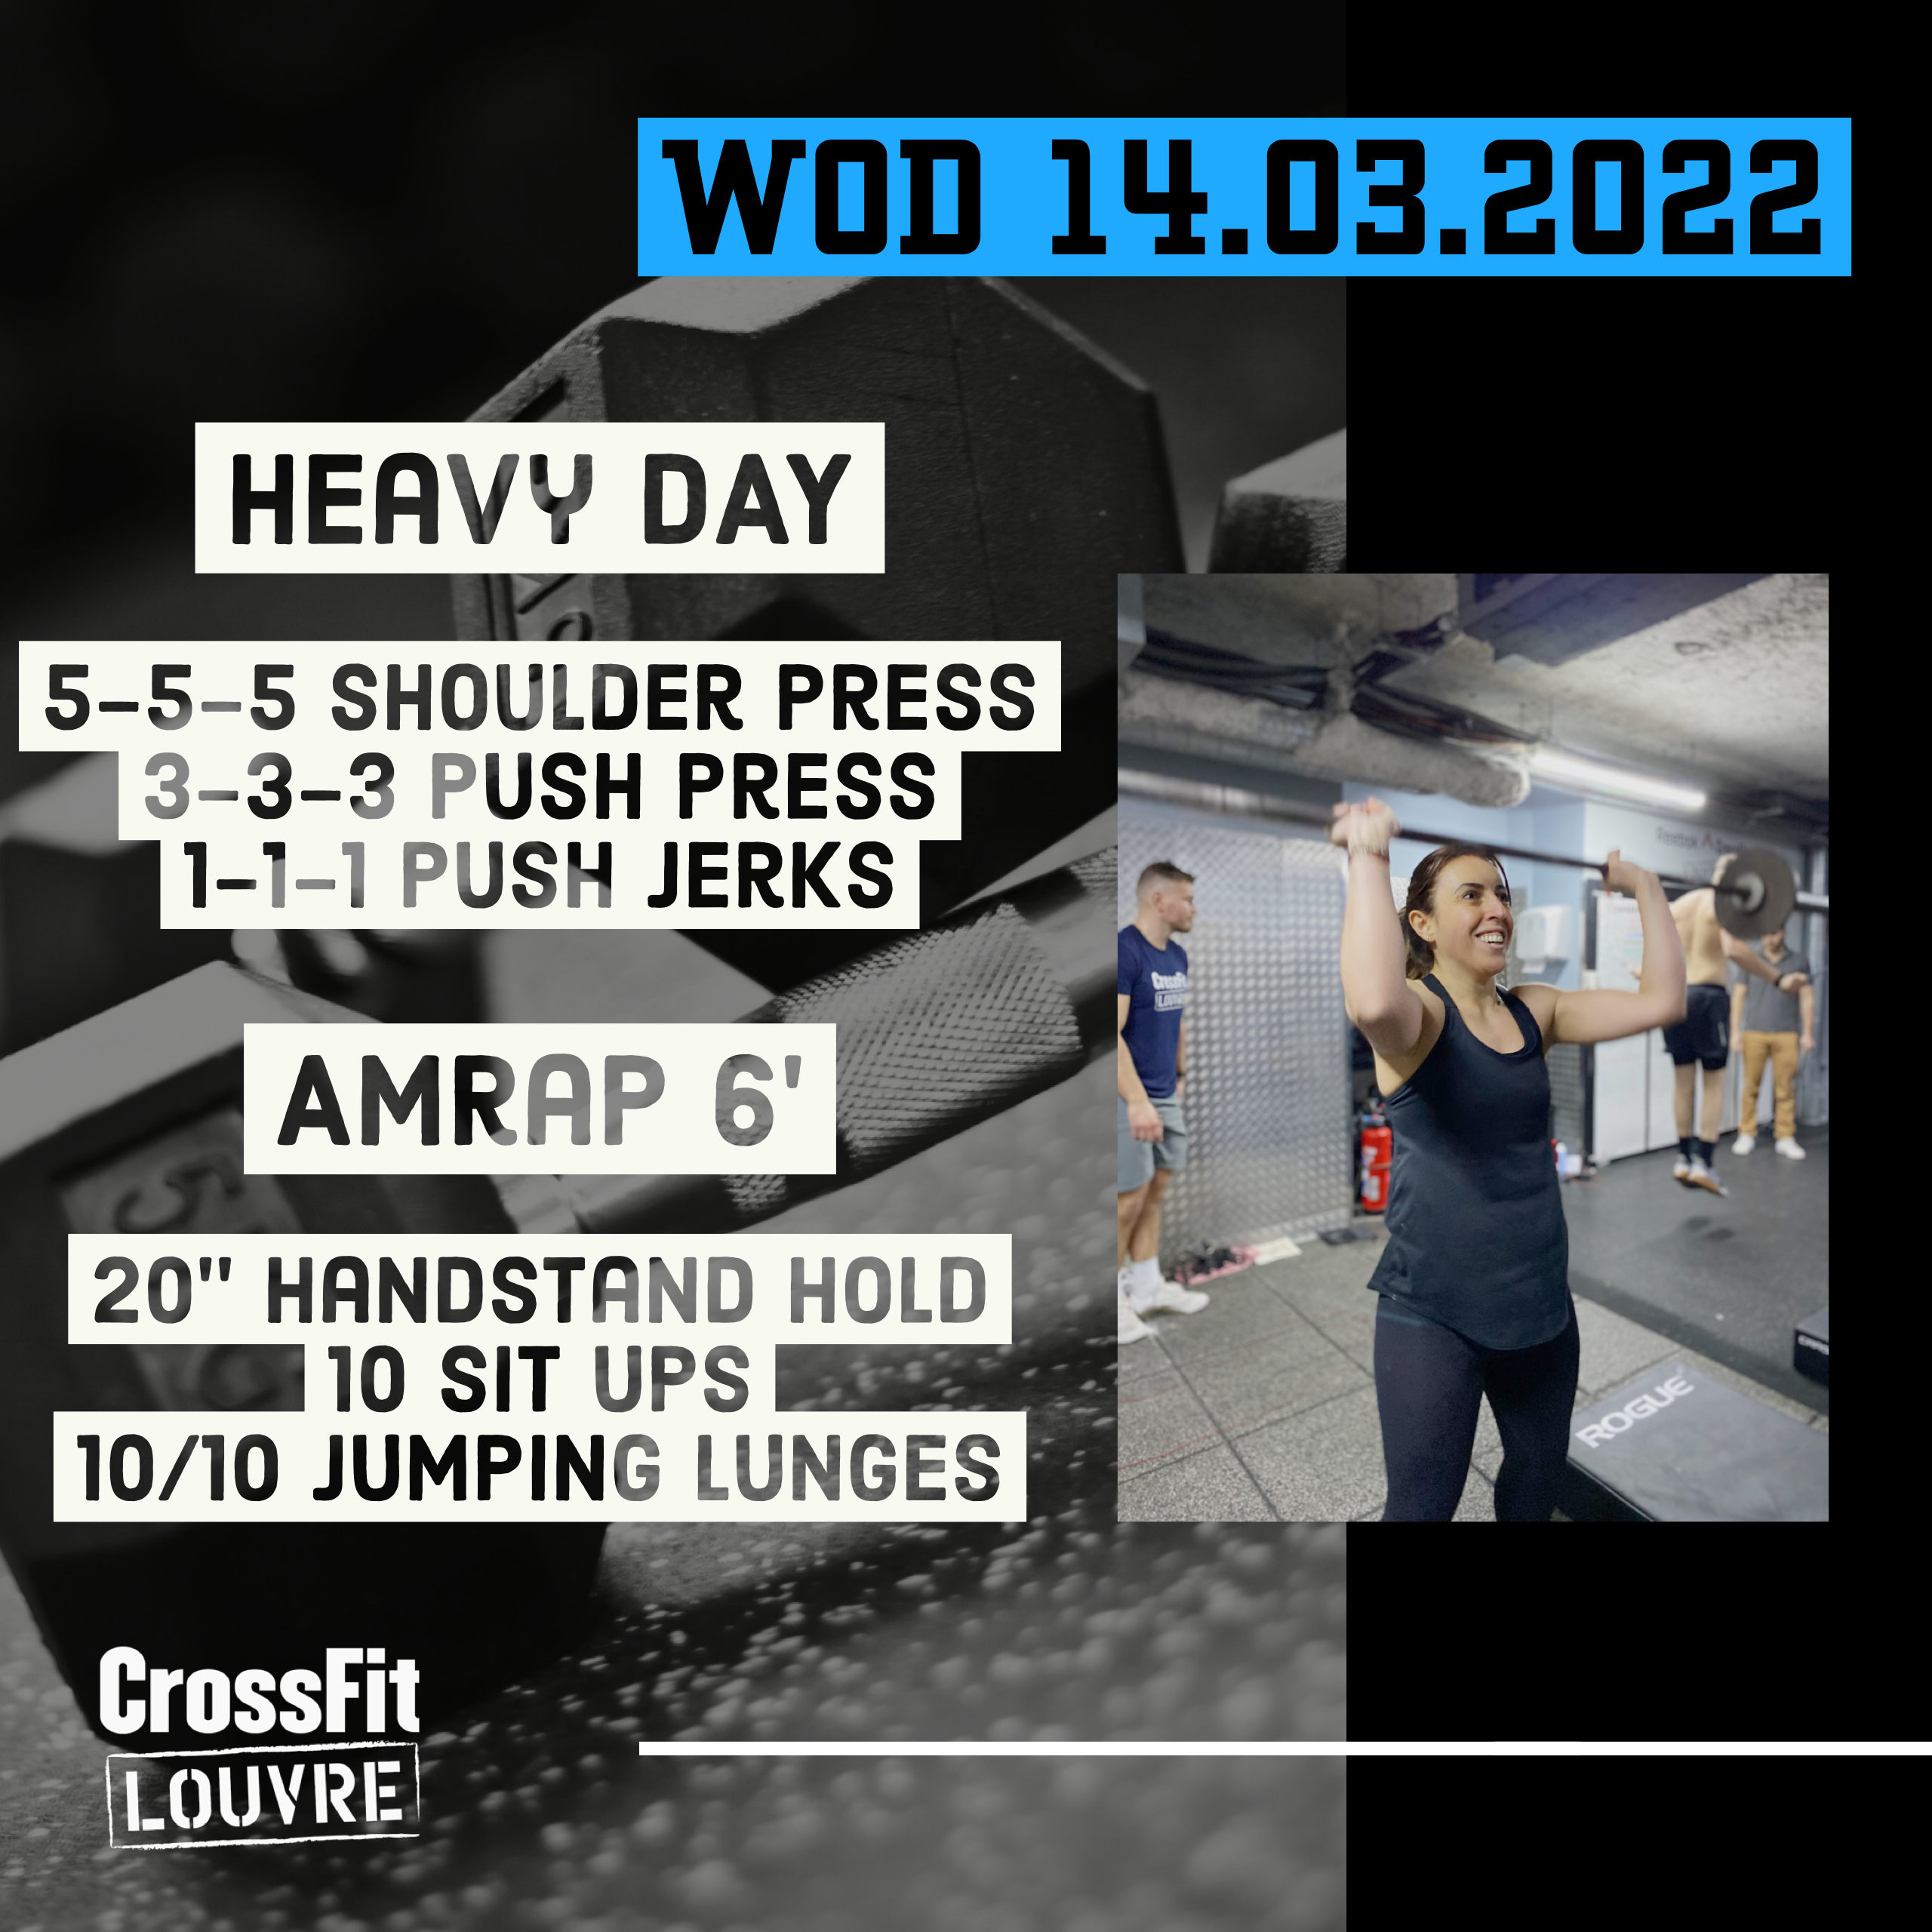 HEAVY DAY Shoulder Press Push Press Push Jerk AMRAP Handstand Hold Sit Up Jumping Lunges